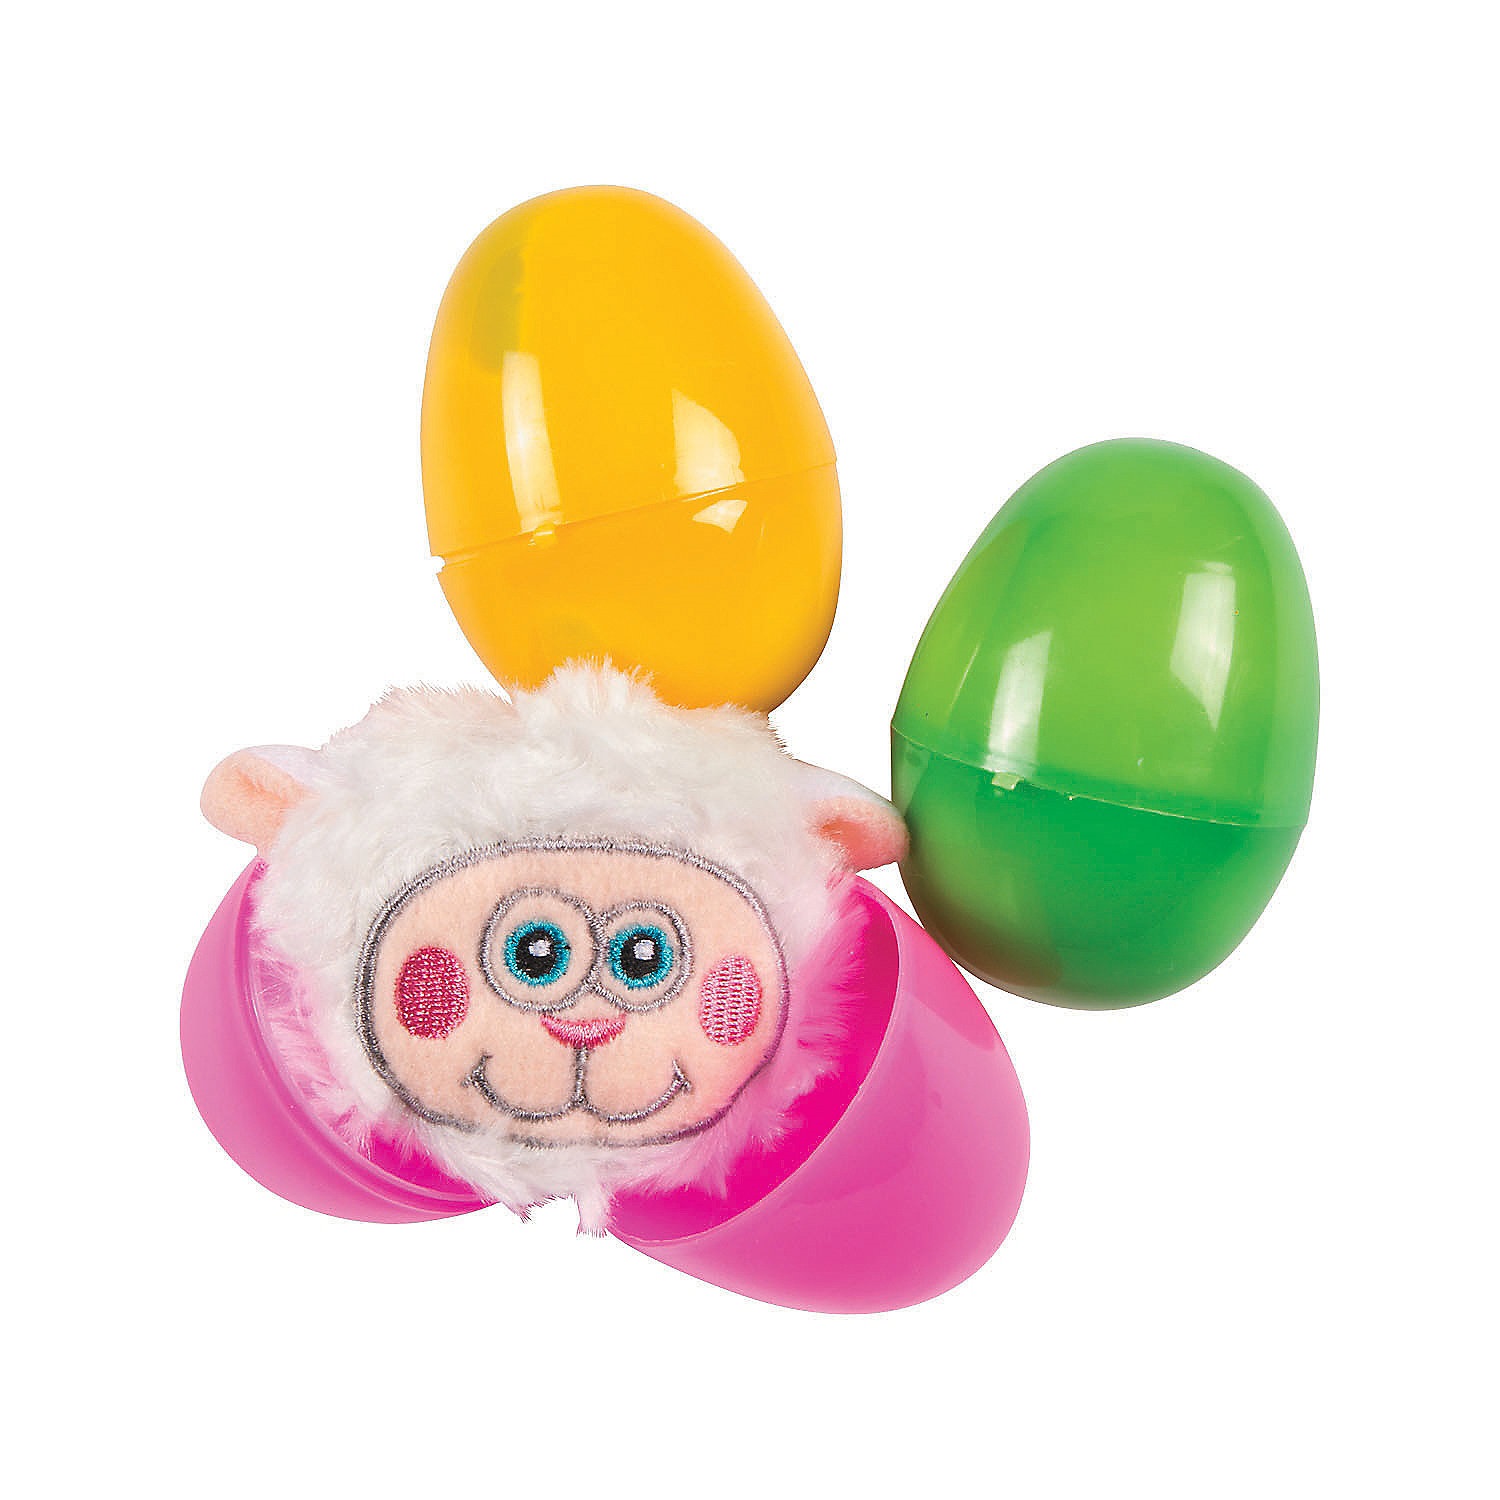 3-easter-eggs-with-chick-bunny-duck-lamb-stuffed-animal-character-12-pc-_13760739-a01